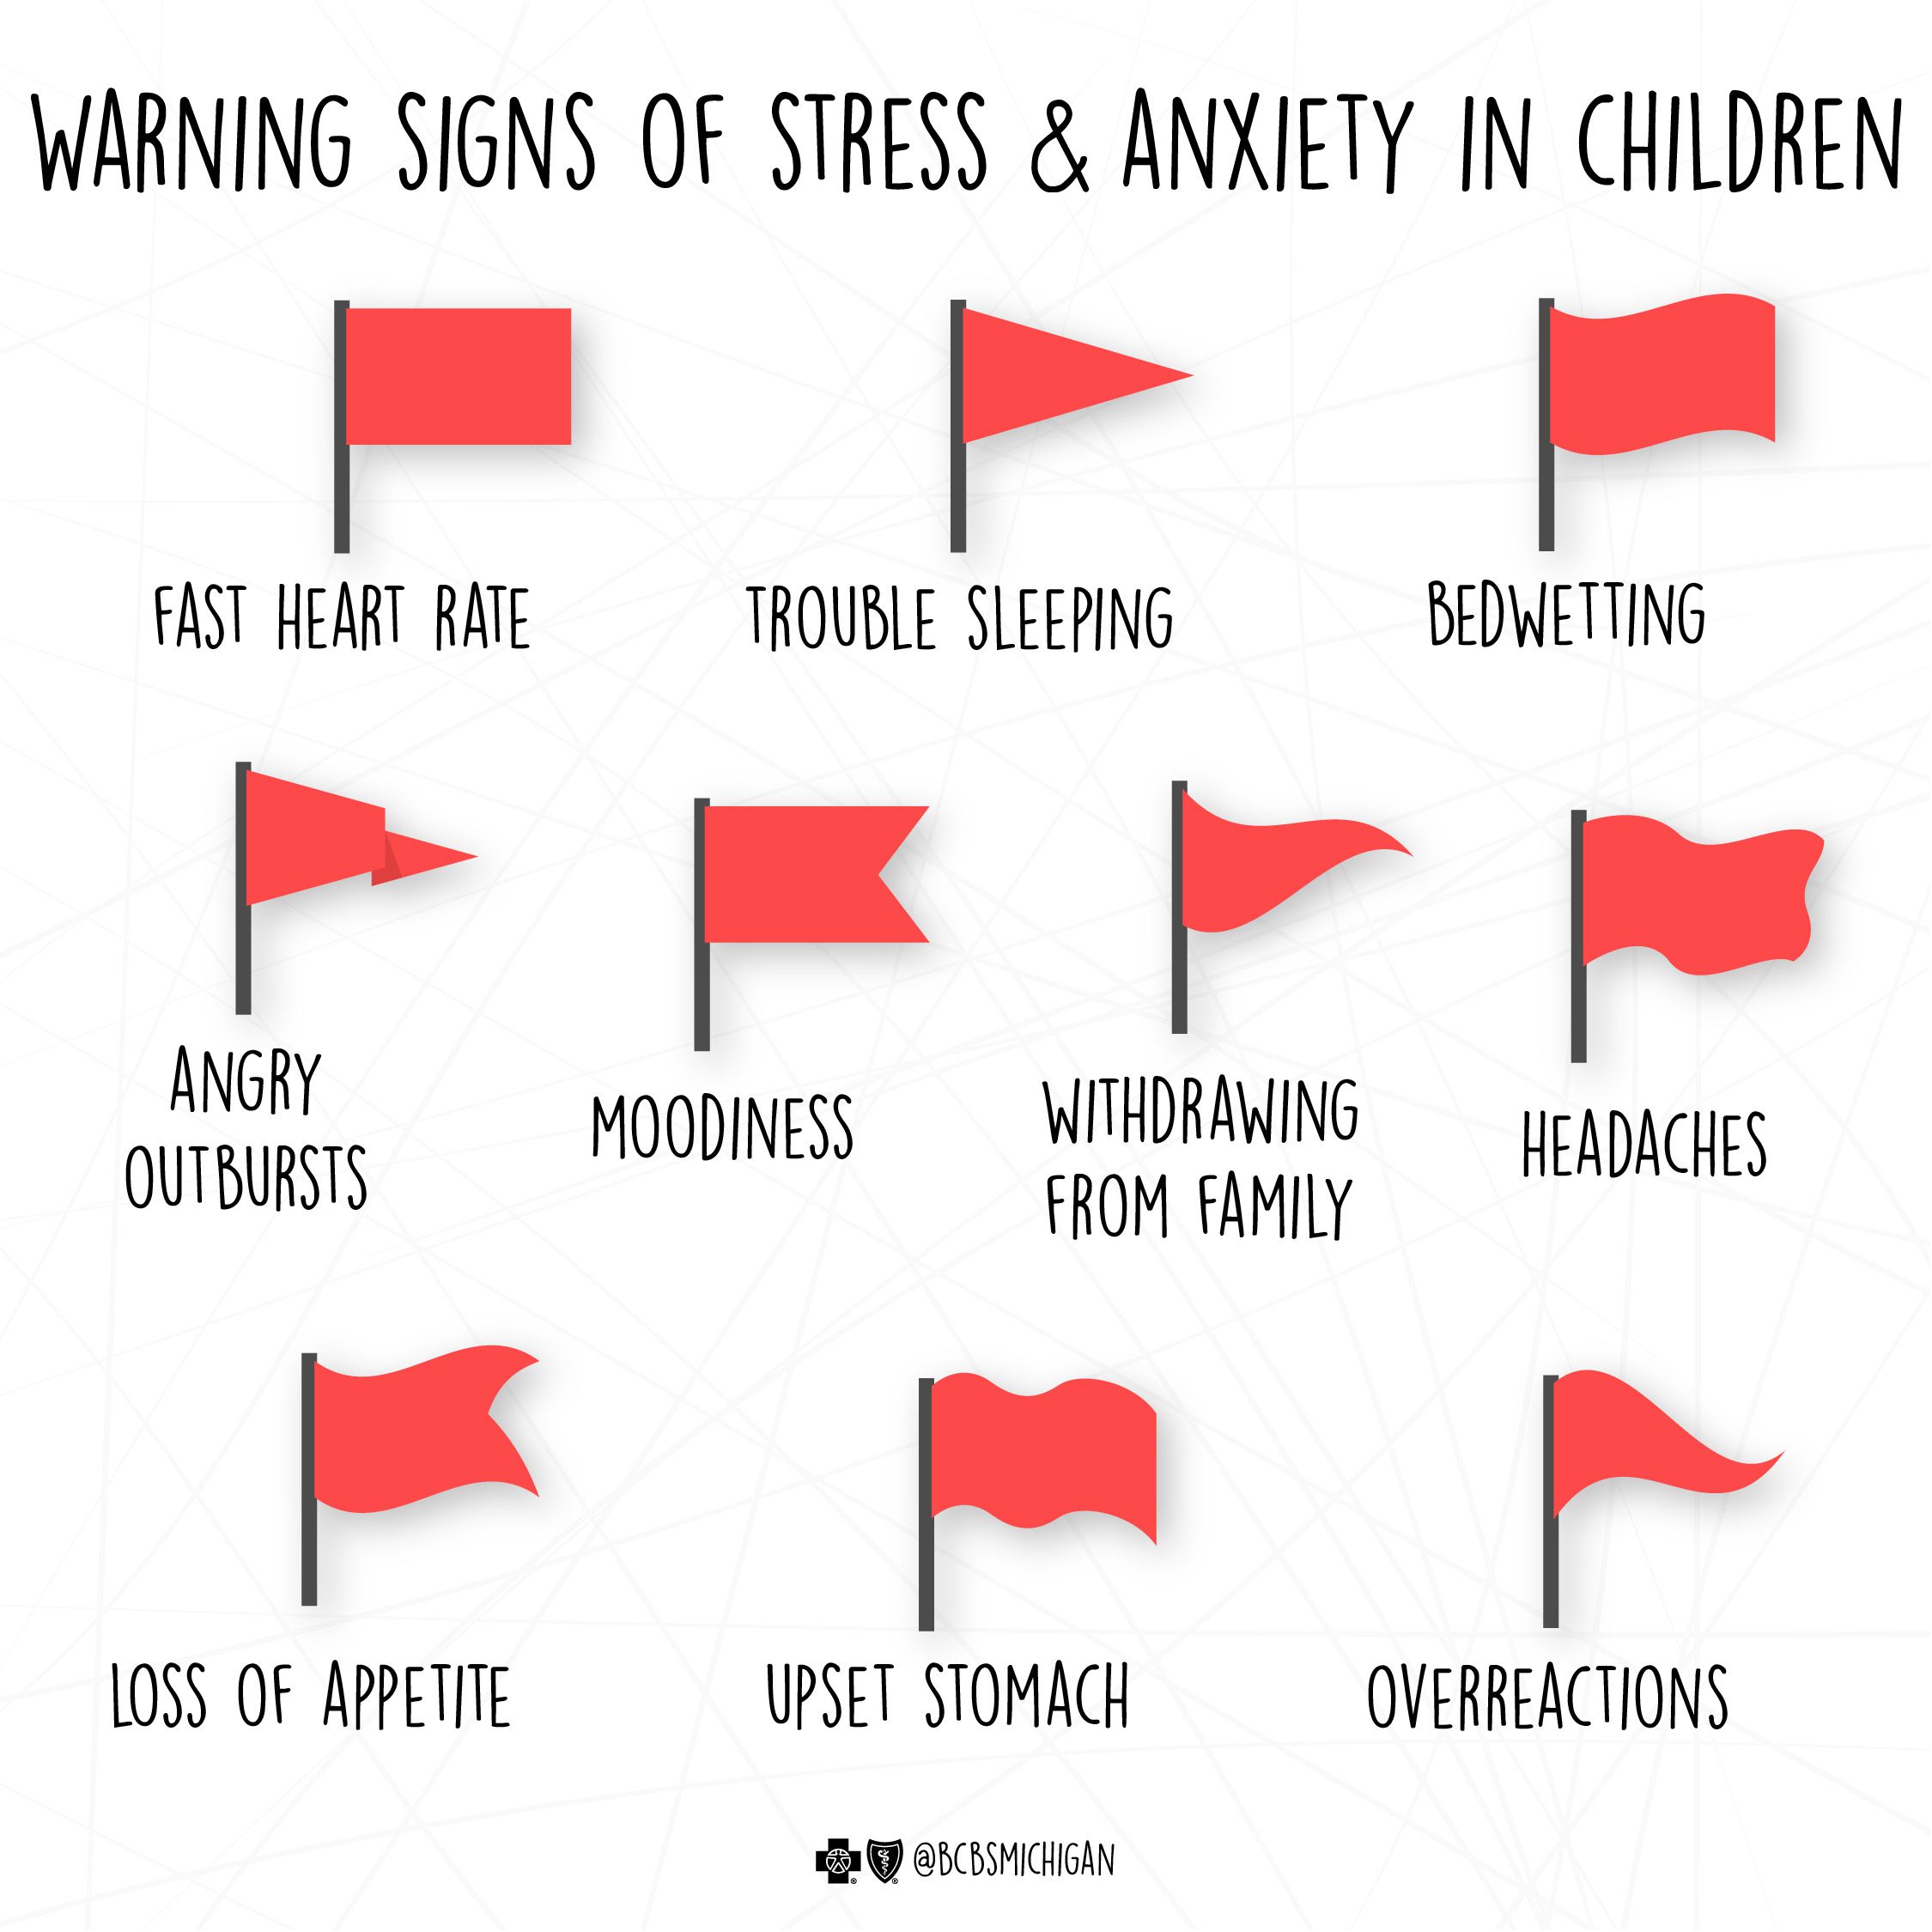 Words on graphic showing warning signs of stress and anxiety in kids